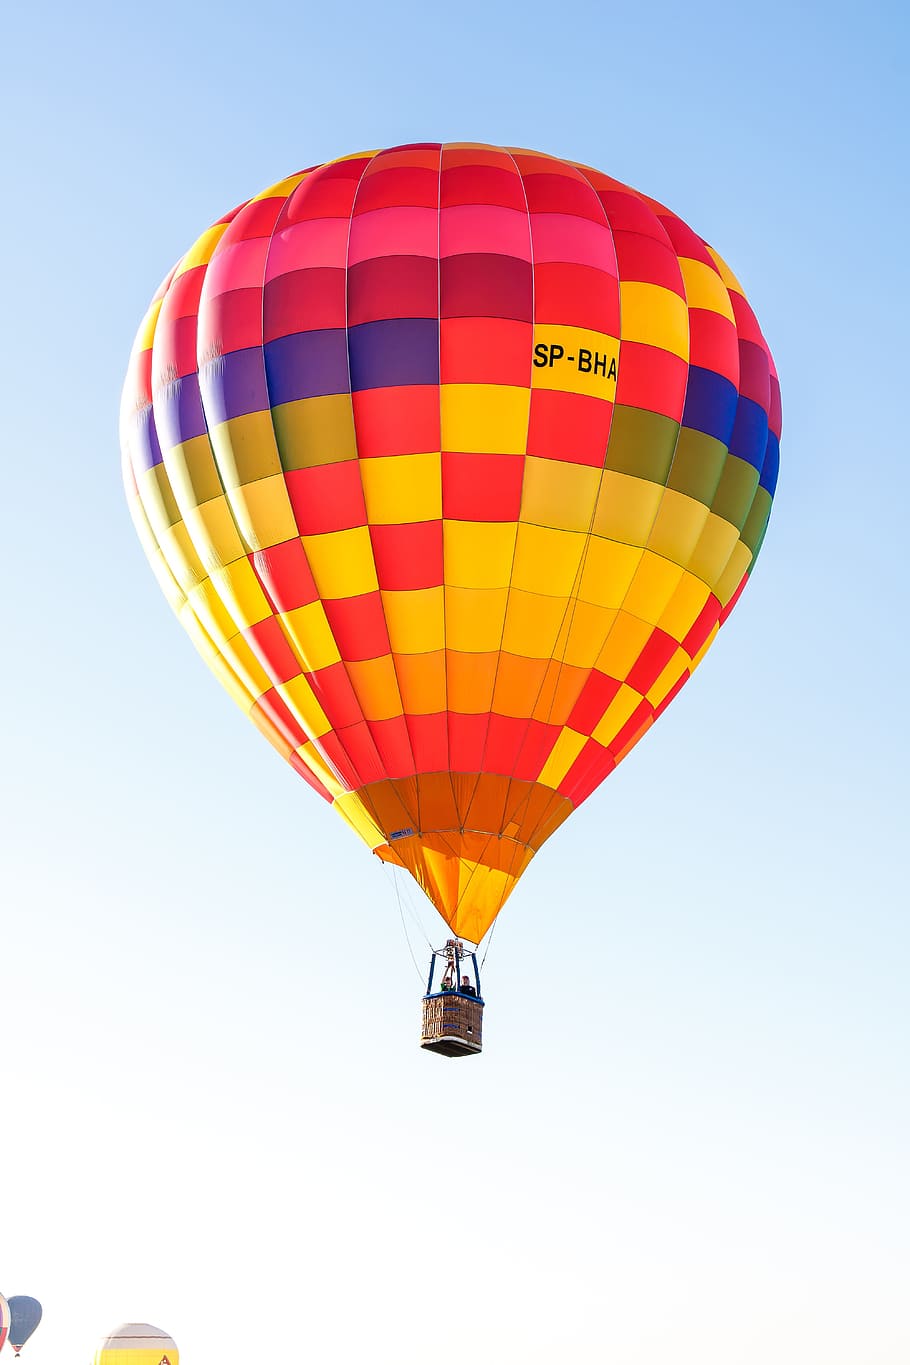 Balloons, Flying, Colorful, Air, Sky, lifting, float, hot air balloon trip, hot air balloon, multi colored